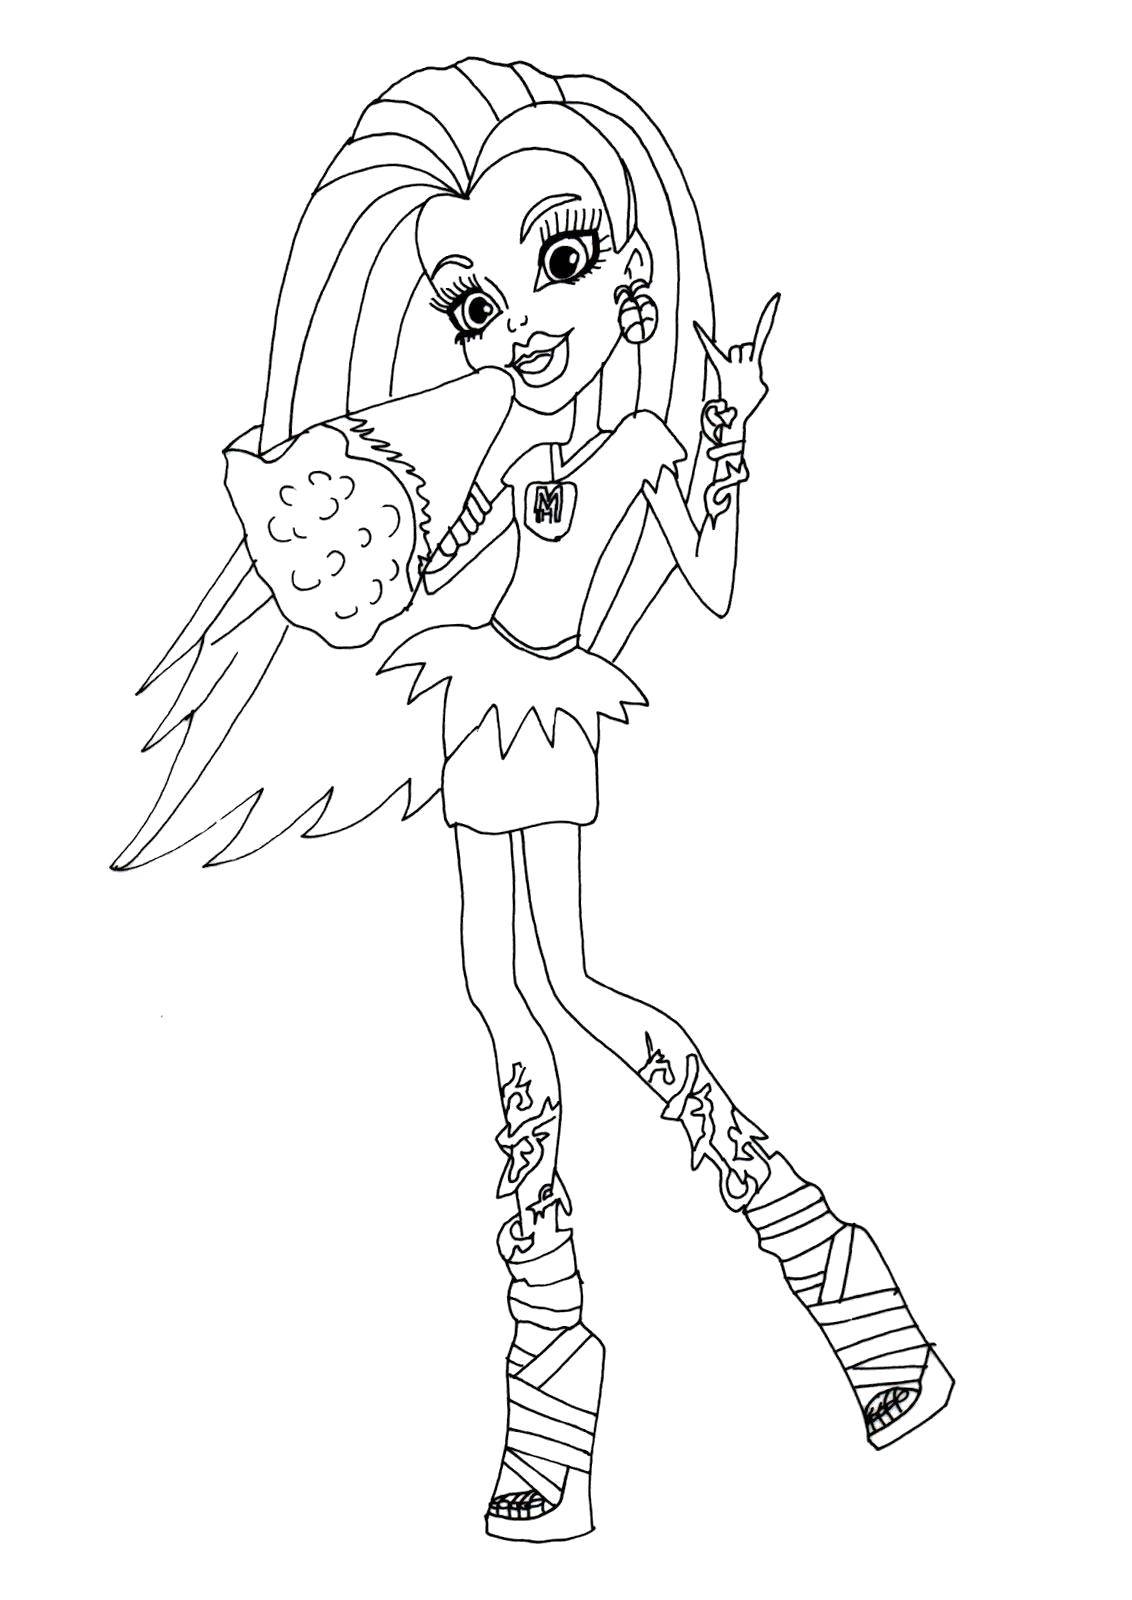 Coloring Monster cheerleader. Category school of monsters. Tags:  Monster High.